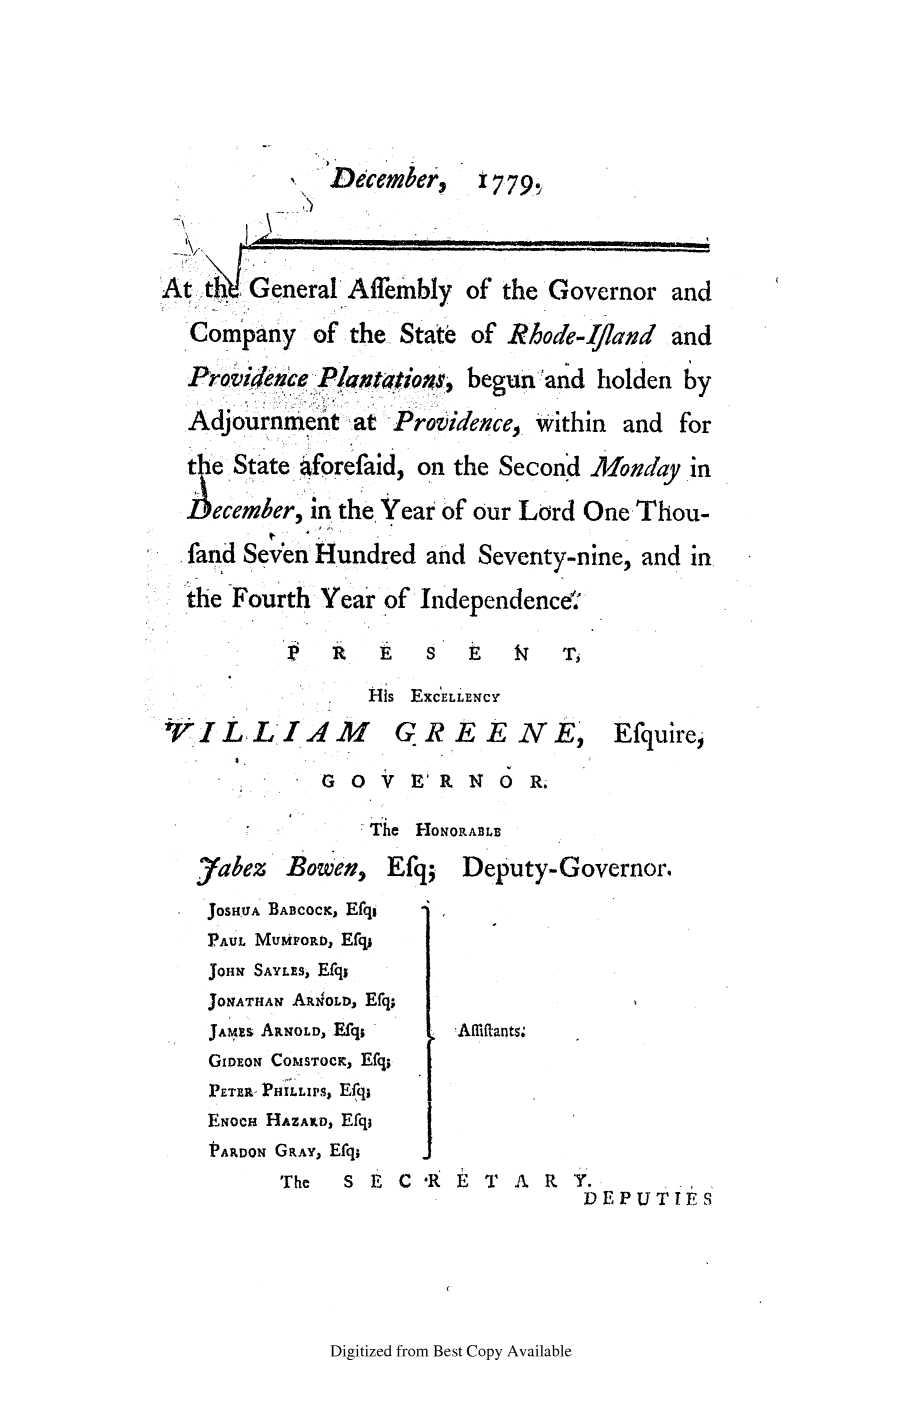 handle is hein.ssl/ssri0436 and id is 1 raw text is: Decembet,

1779

At~ h General'Afembly of the Governor and
Company of the State of Rhode-Ifand and
Providence Pantatios. begunand holden by
Adjournment at Providence, Within and for
the State aforefaid, on the Second Mond ayin
Iecember' in the Year of our Lord One Thou-
fand Seven Hundred and Seventy-nine, and in
ihe Fourth Year of Independence'.

X' R  E  S         )~
His EXCELLENCY
rIL;LIM,4,     GR E E NE,
G   V E' R N O R.

Efquire,

-The HONORABLE
yabez     Bowen,     Efq;    Deputy-Governor.
JOSHU A BABcocK, Efq,
PAUL MuMPOitD, Ecl,
JOHN SAYLEs, Efq;
JONATHAN ARN'OLD, Efq;
JAmxZs ARNOLD, Efq;       !Affitants;
GiDEoN CoMsTocK, Efq;
PETER- PHILLIPS, Efq;
ENocH HAZAILD, Efq;
PARDON GRAY, Efq;
The    S ECR           T  A R   Y.
DEPUTIES

Digitized from Best Copy Available


